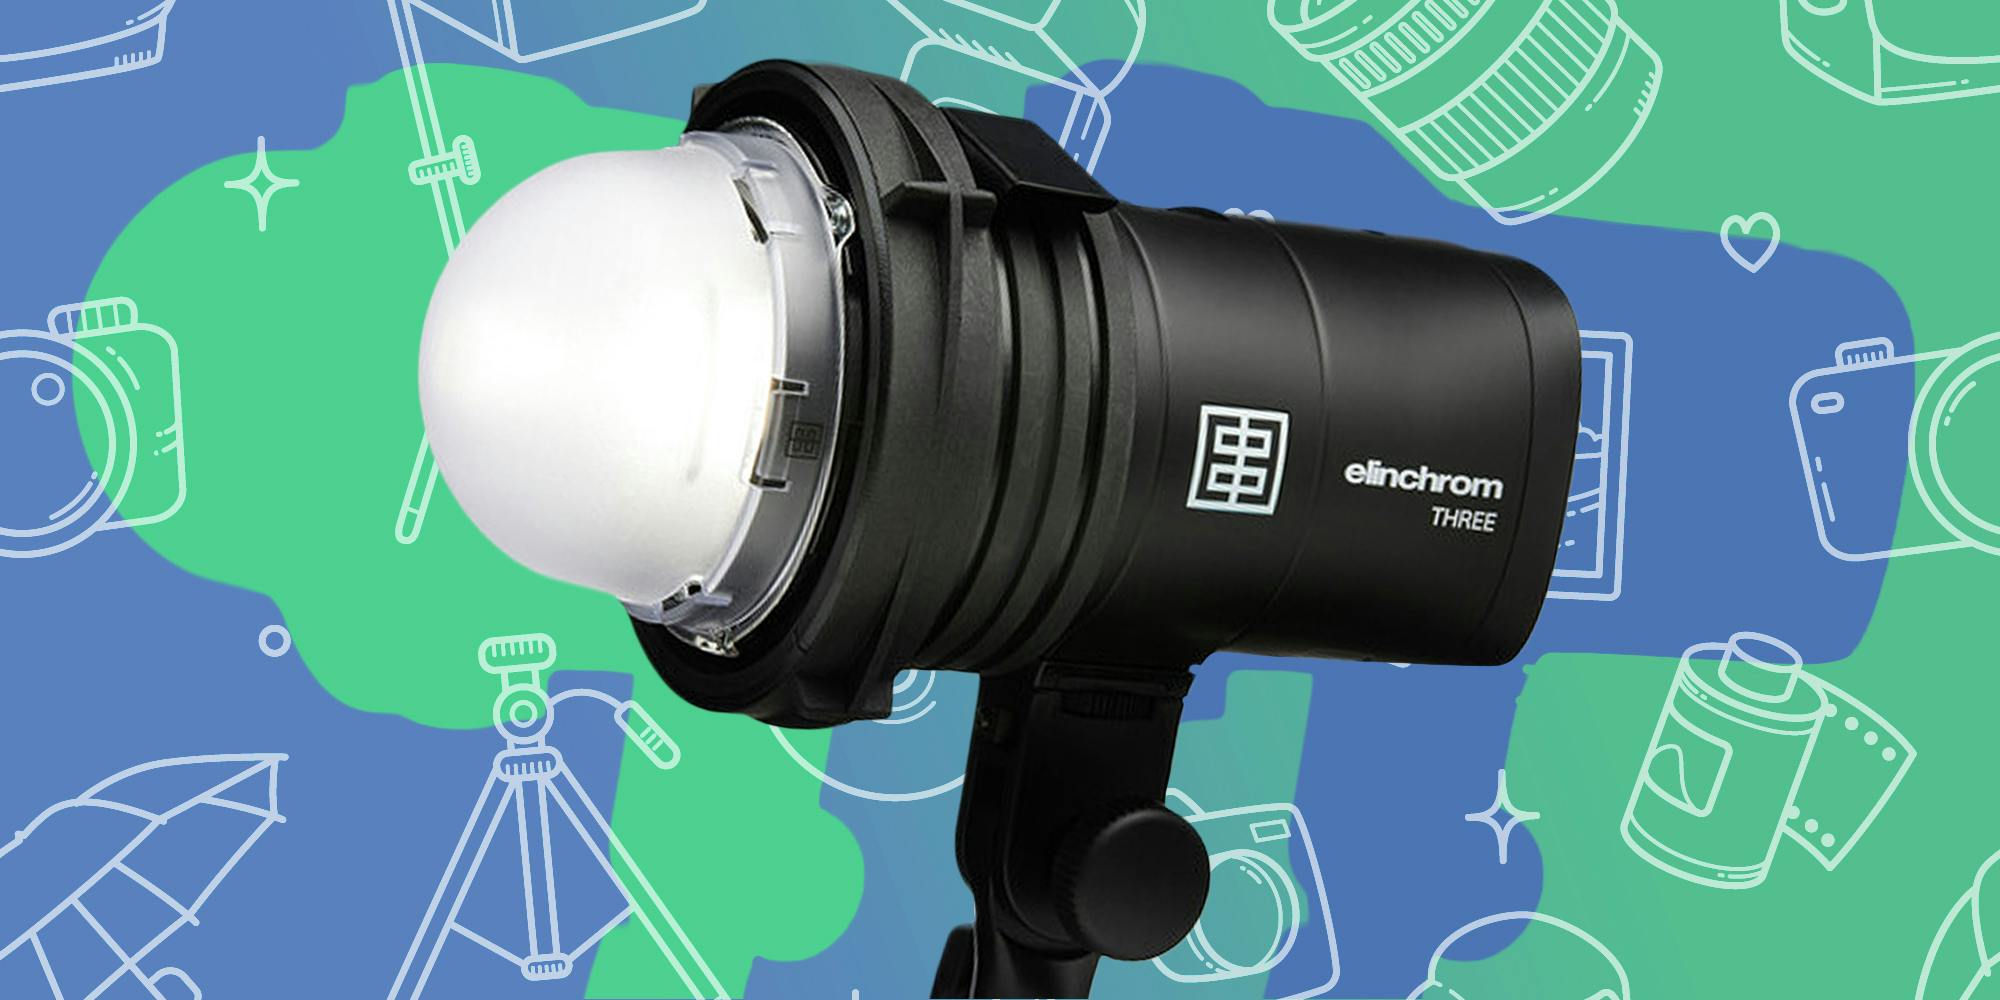 We Took The Elinchrom Three On A Road Trip To Test Its Power For Creators On The Move